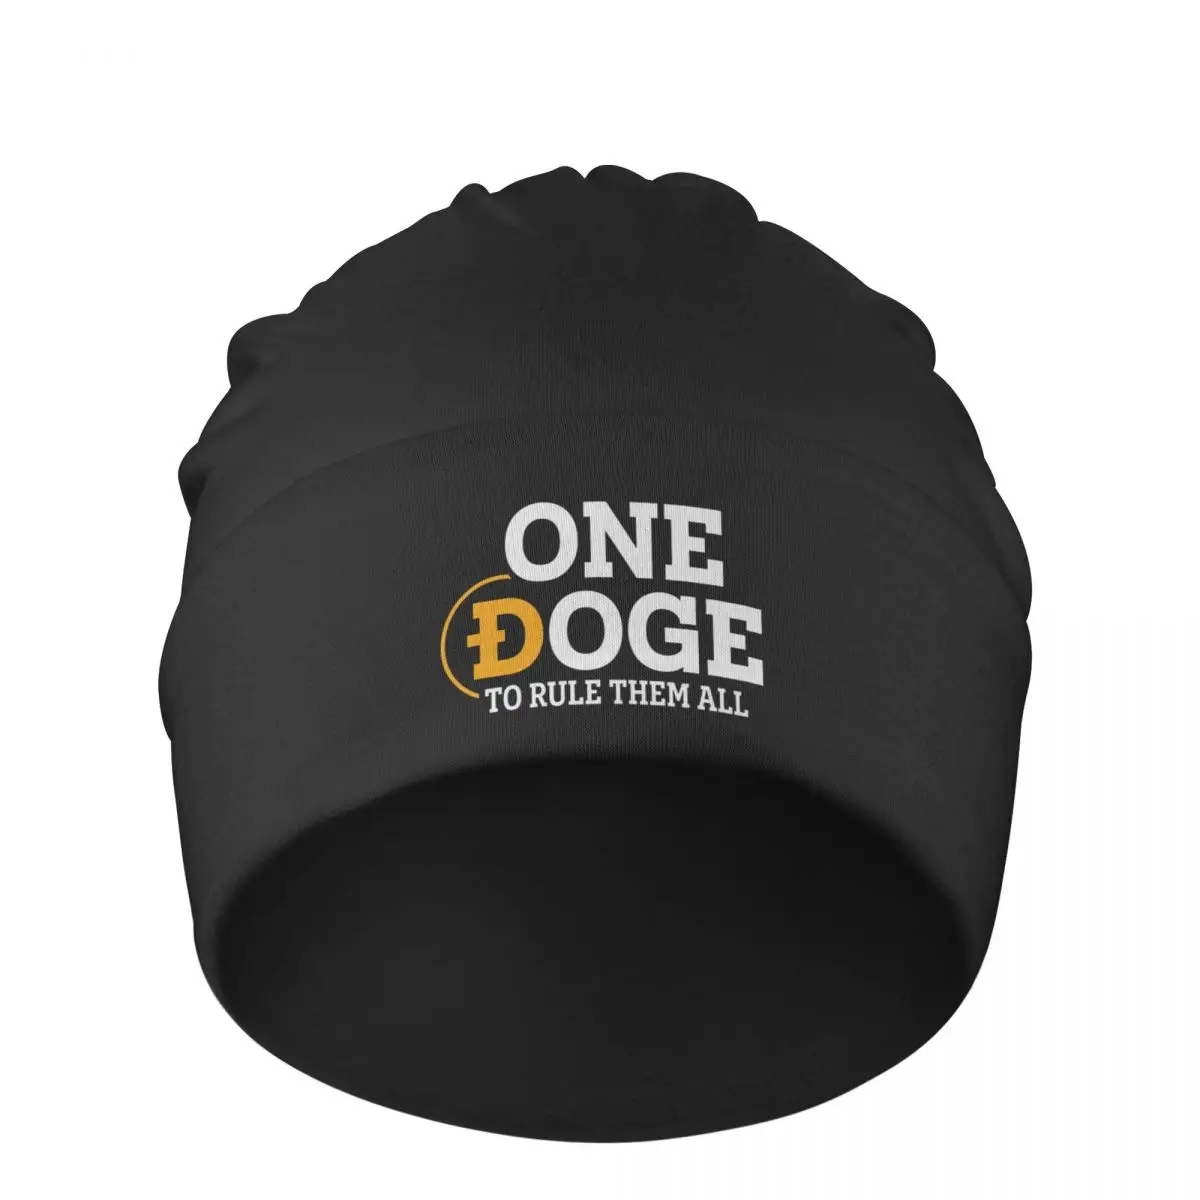 

ONE DOGE TO RULE THEM ALL DOGECOIN Homme Winter Warm Knitted Hat Dogecoin Skullies Beanies Caps For Men Women Style Fabric Hats